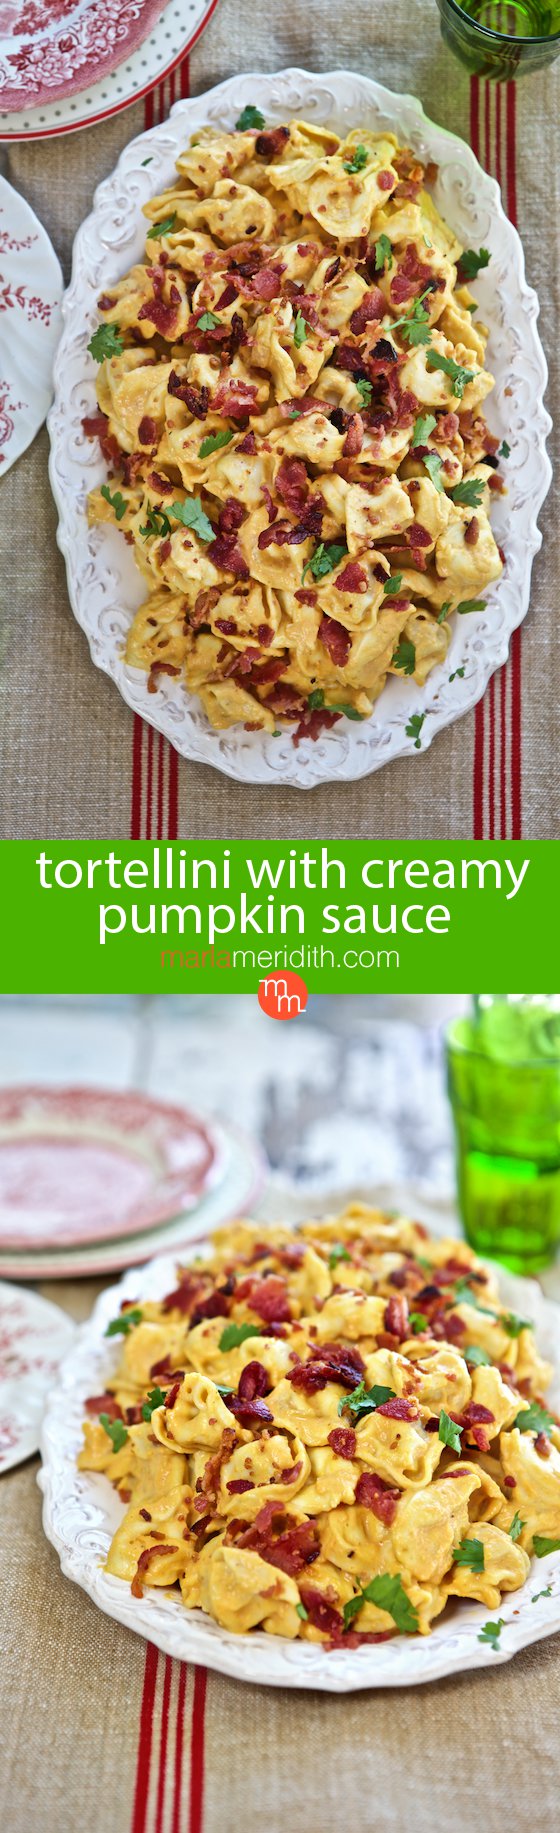 Tortellini with Creamy Pumpkin Sauce, this simple & delicious pasta recipe is bursting with hearty fall flavors! MarlaMeridith.com ( @marlameridith )